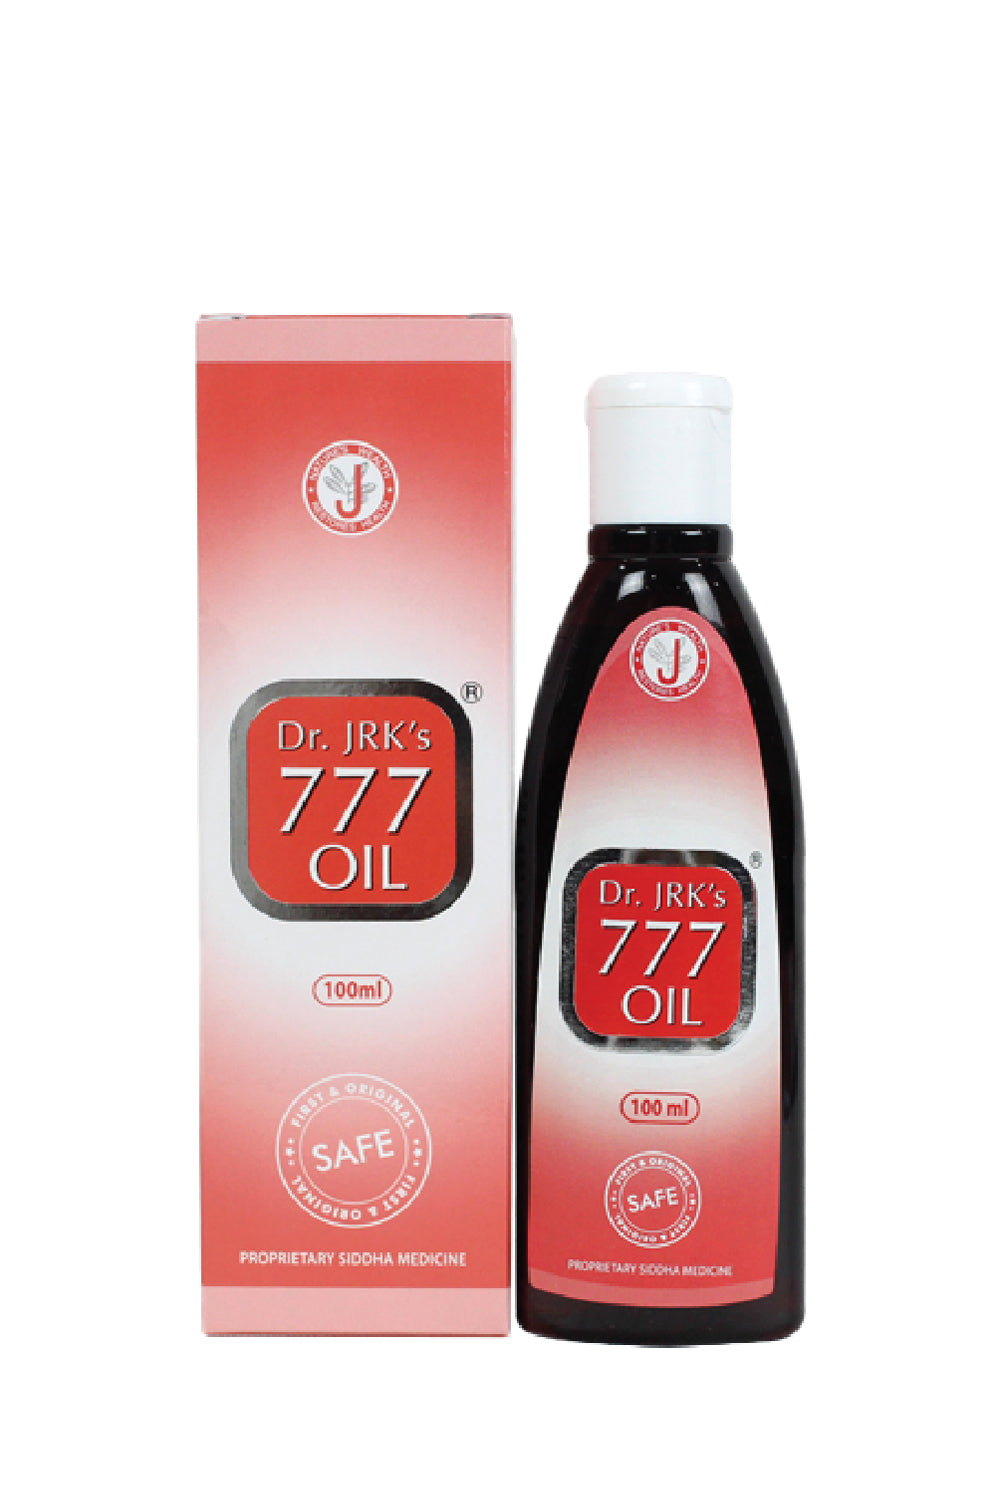  Dr. JRK's 777 Oil for all types of psoriasis